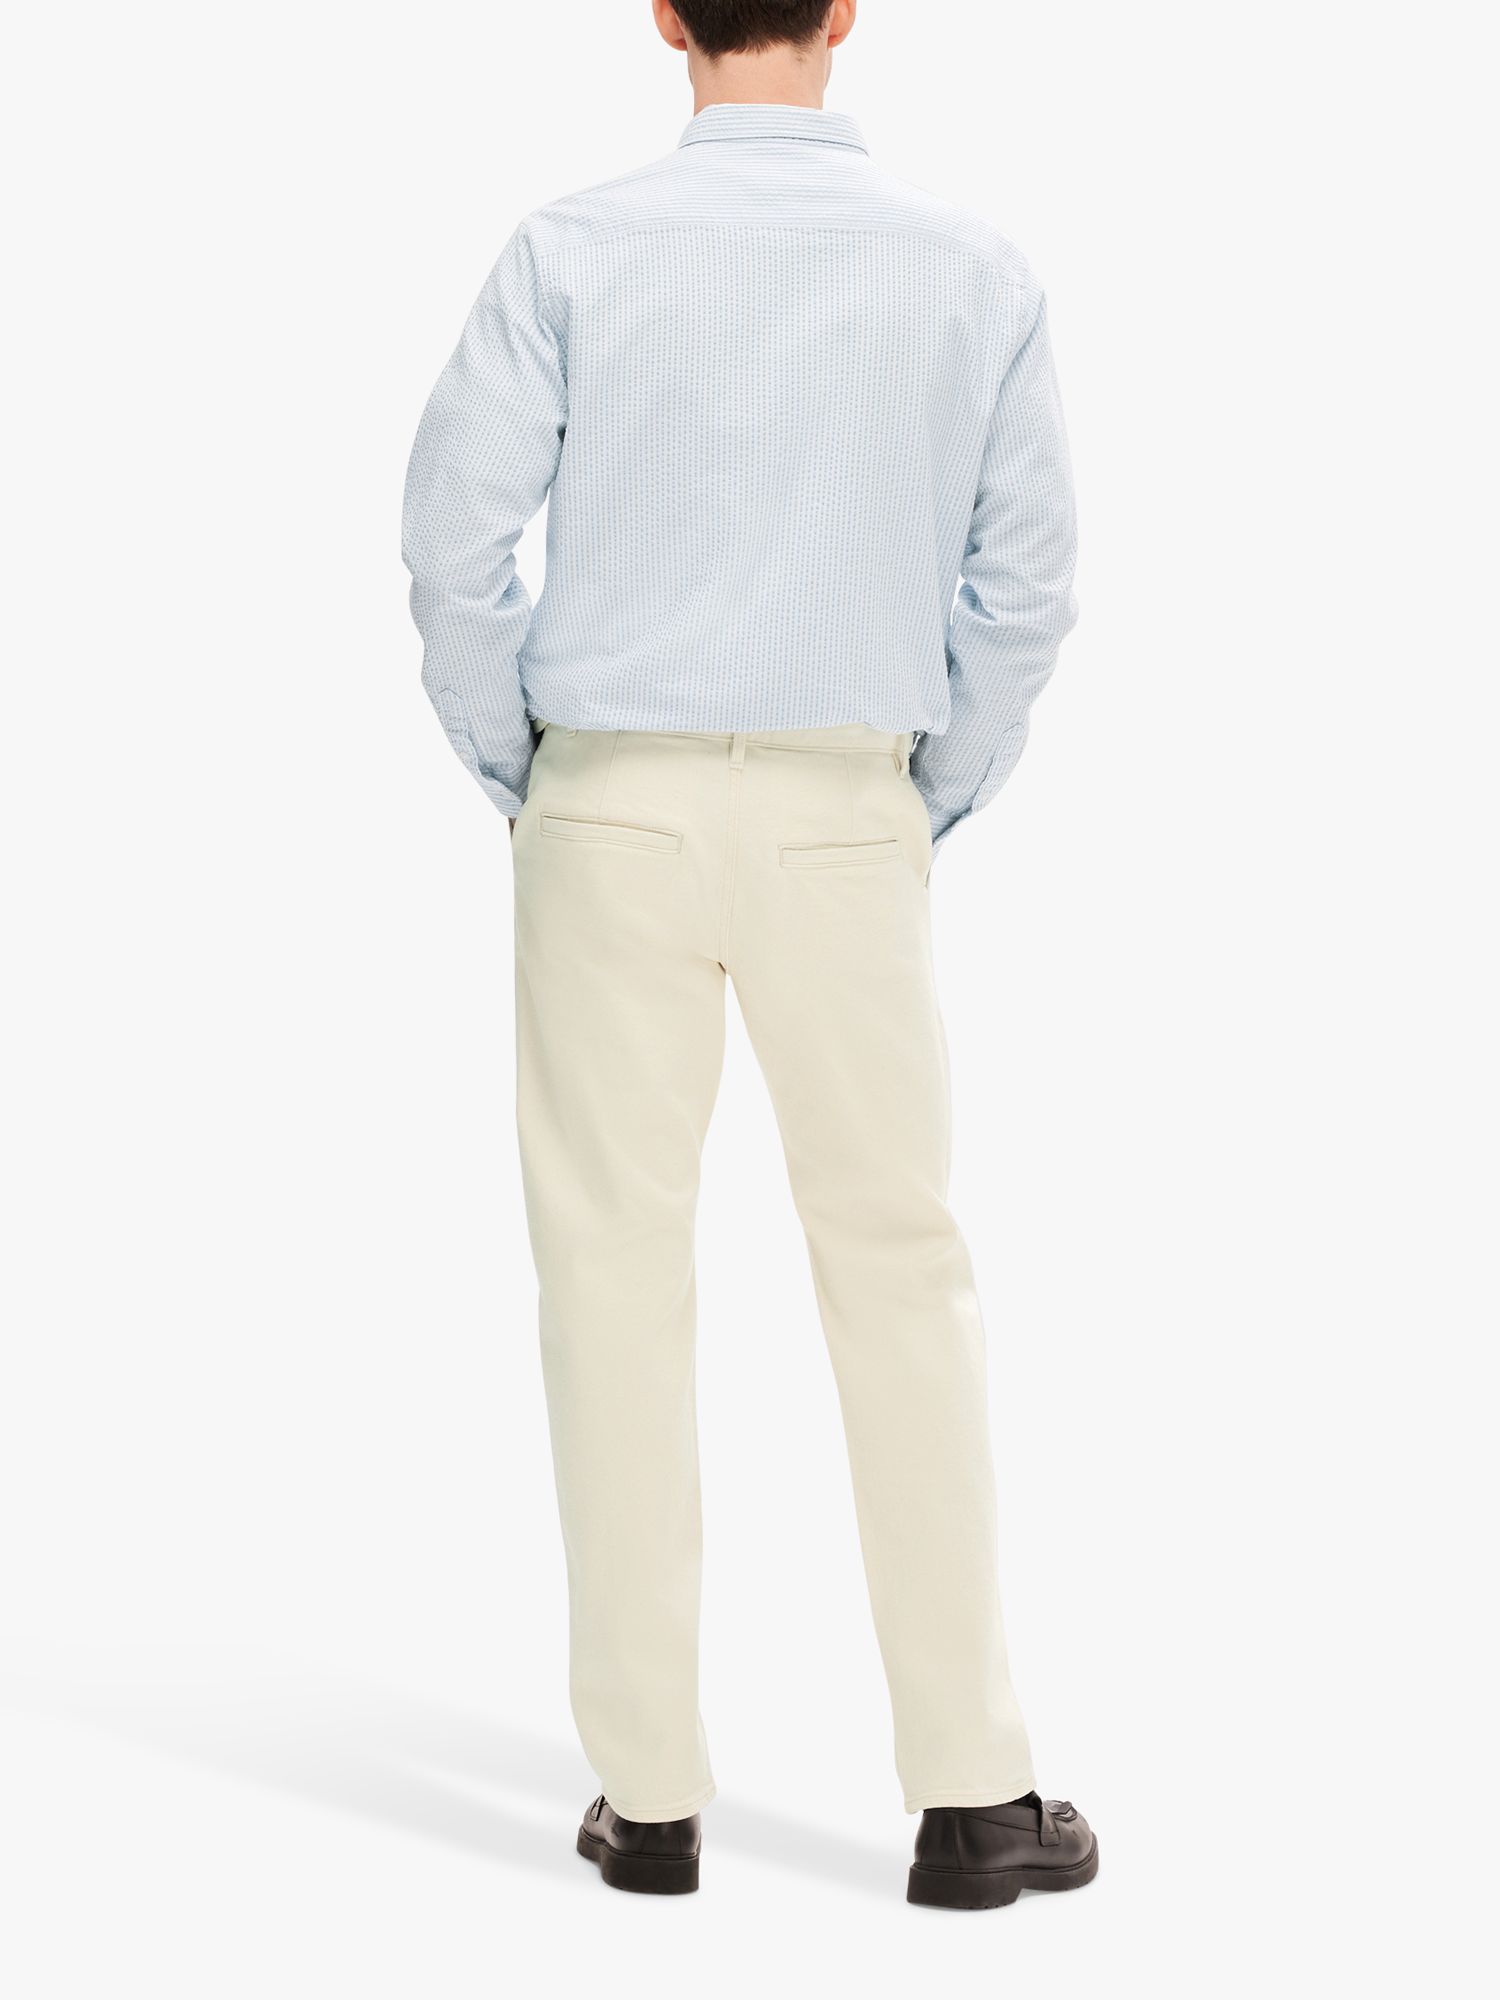 Buy SELECTED HOMME Straight Fit Chinos, Egret Online at johnlewis.com